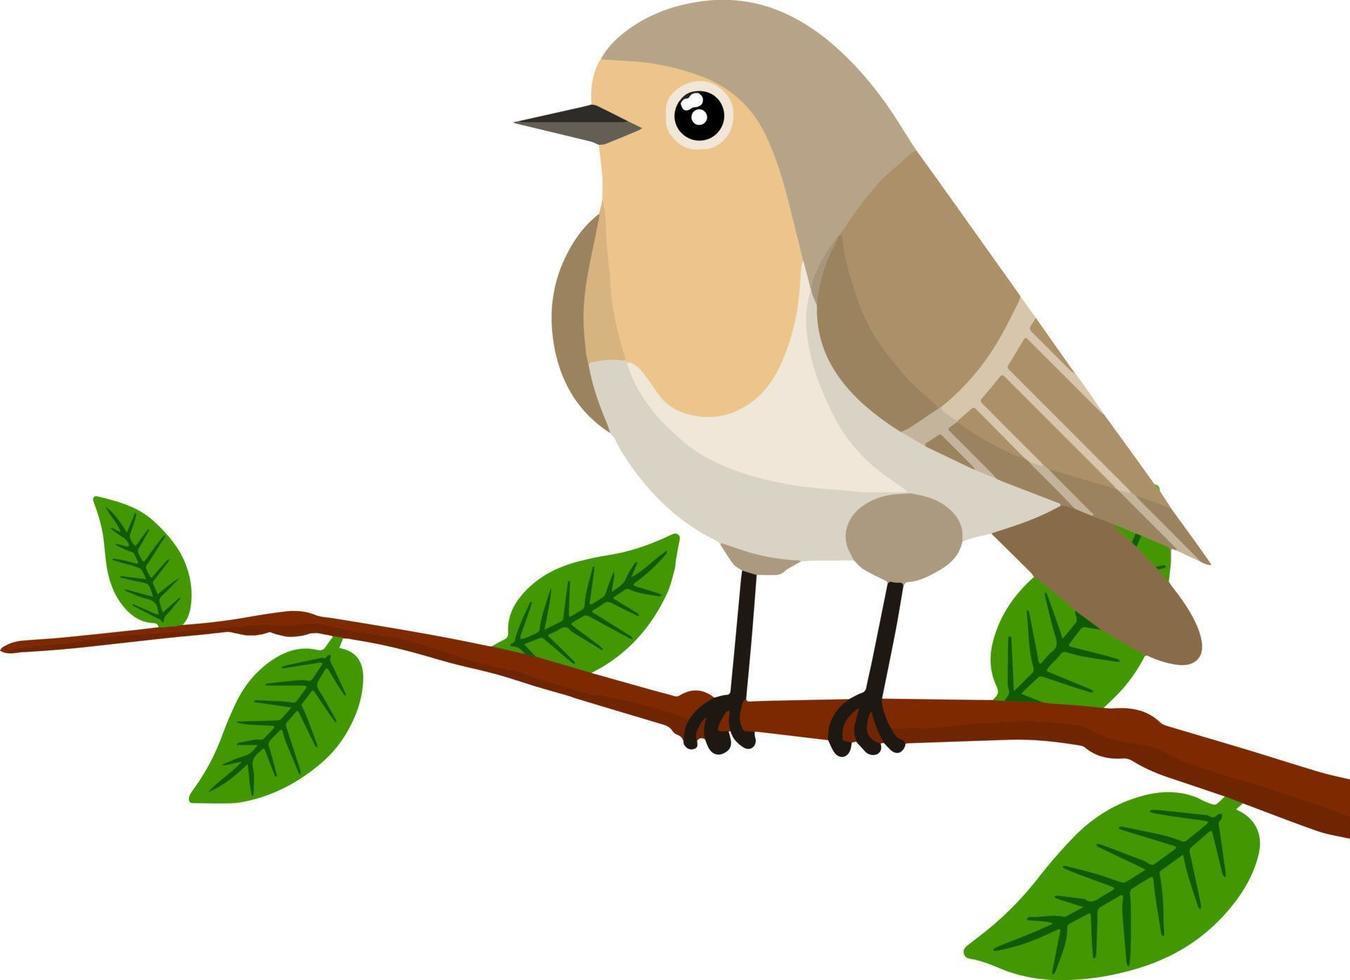 Forest grey bird sitting on a tree branch. Cute Animal with wings and green leaves. Illustration for greeting cards. Cartoon flat illustration vector